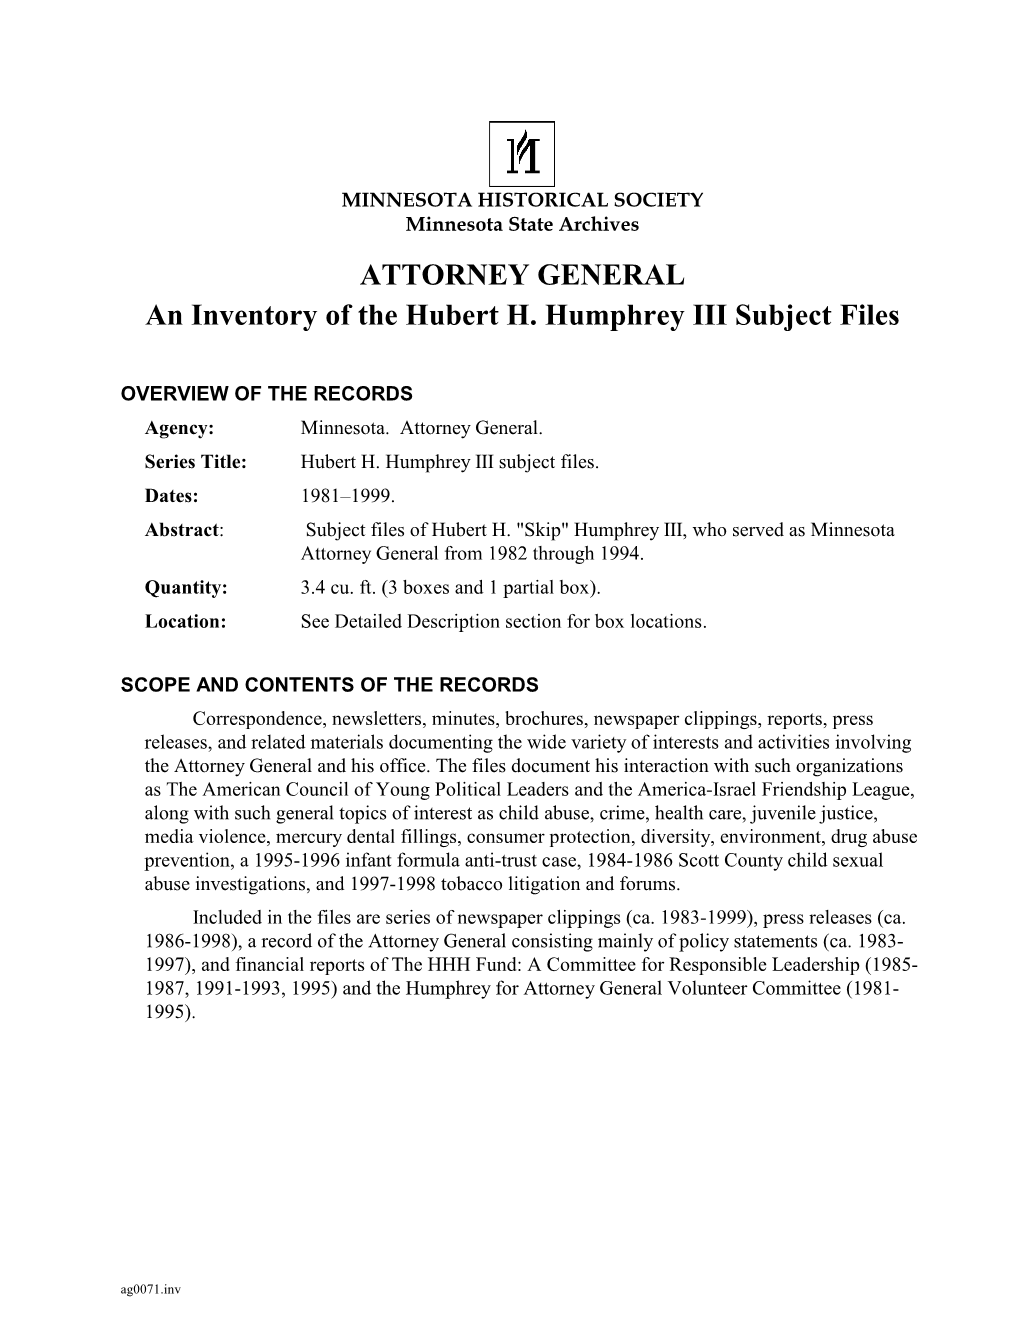 ATTORNEY GENERAL an Inventory of the Hubert H. Humphrey III Subject Files